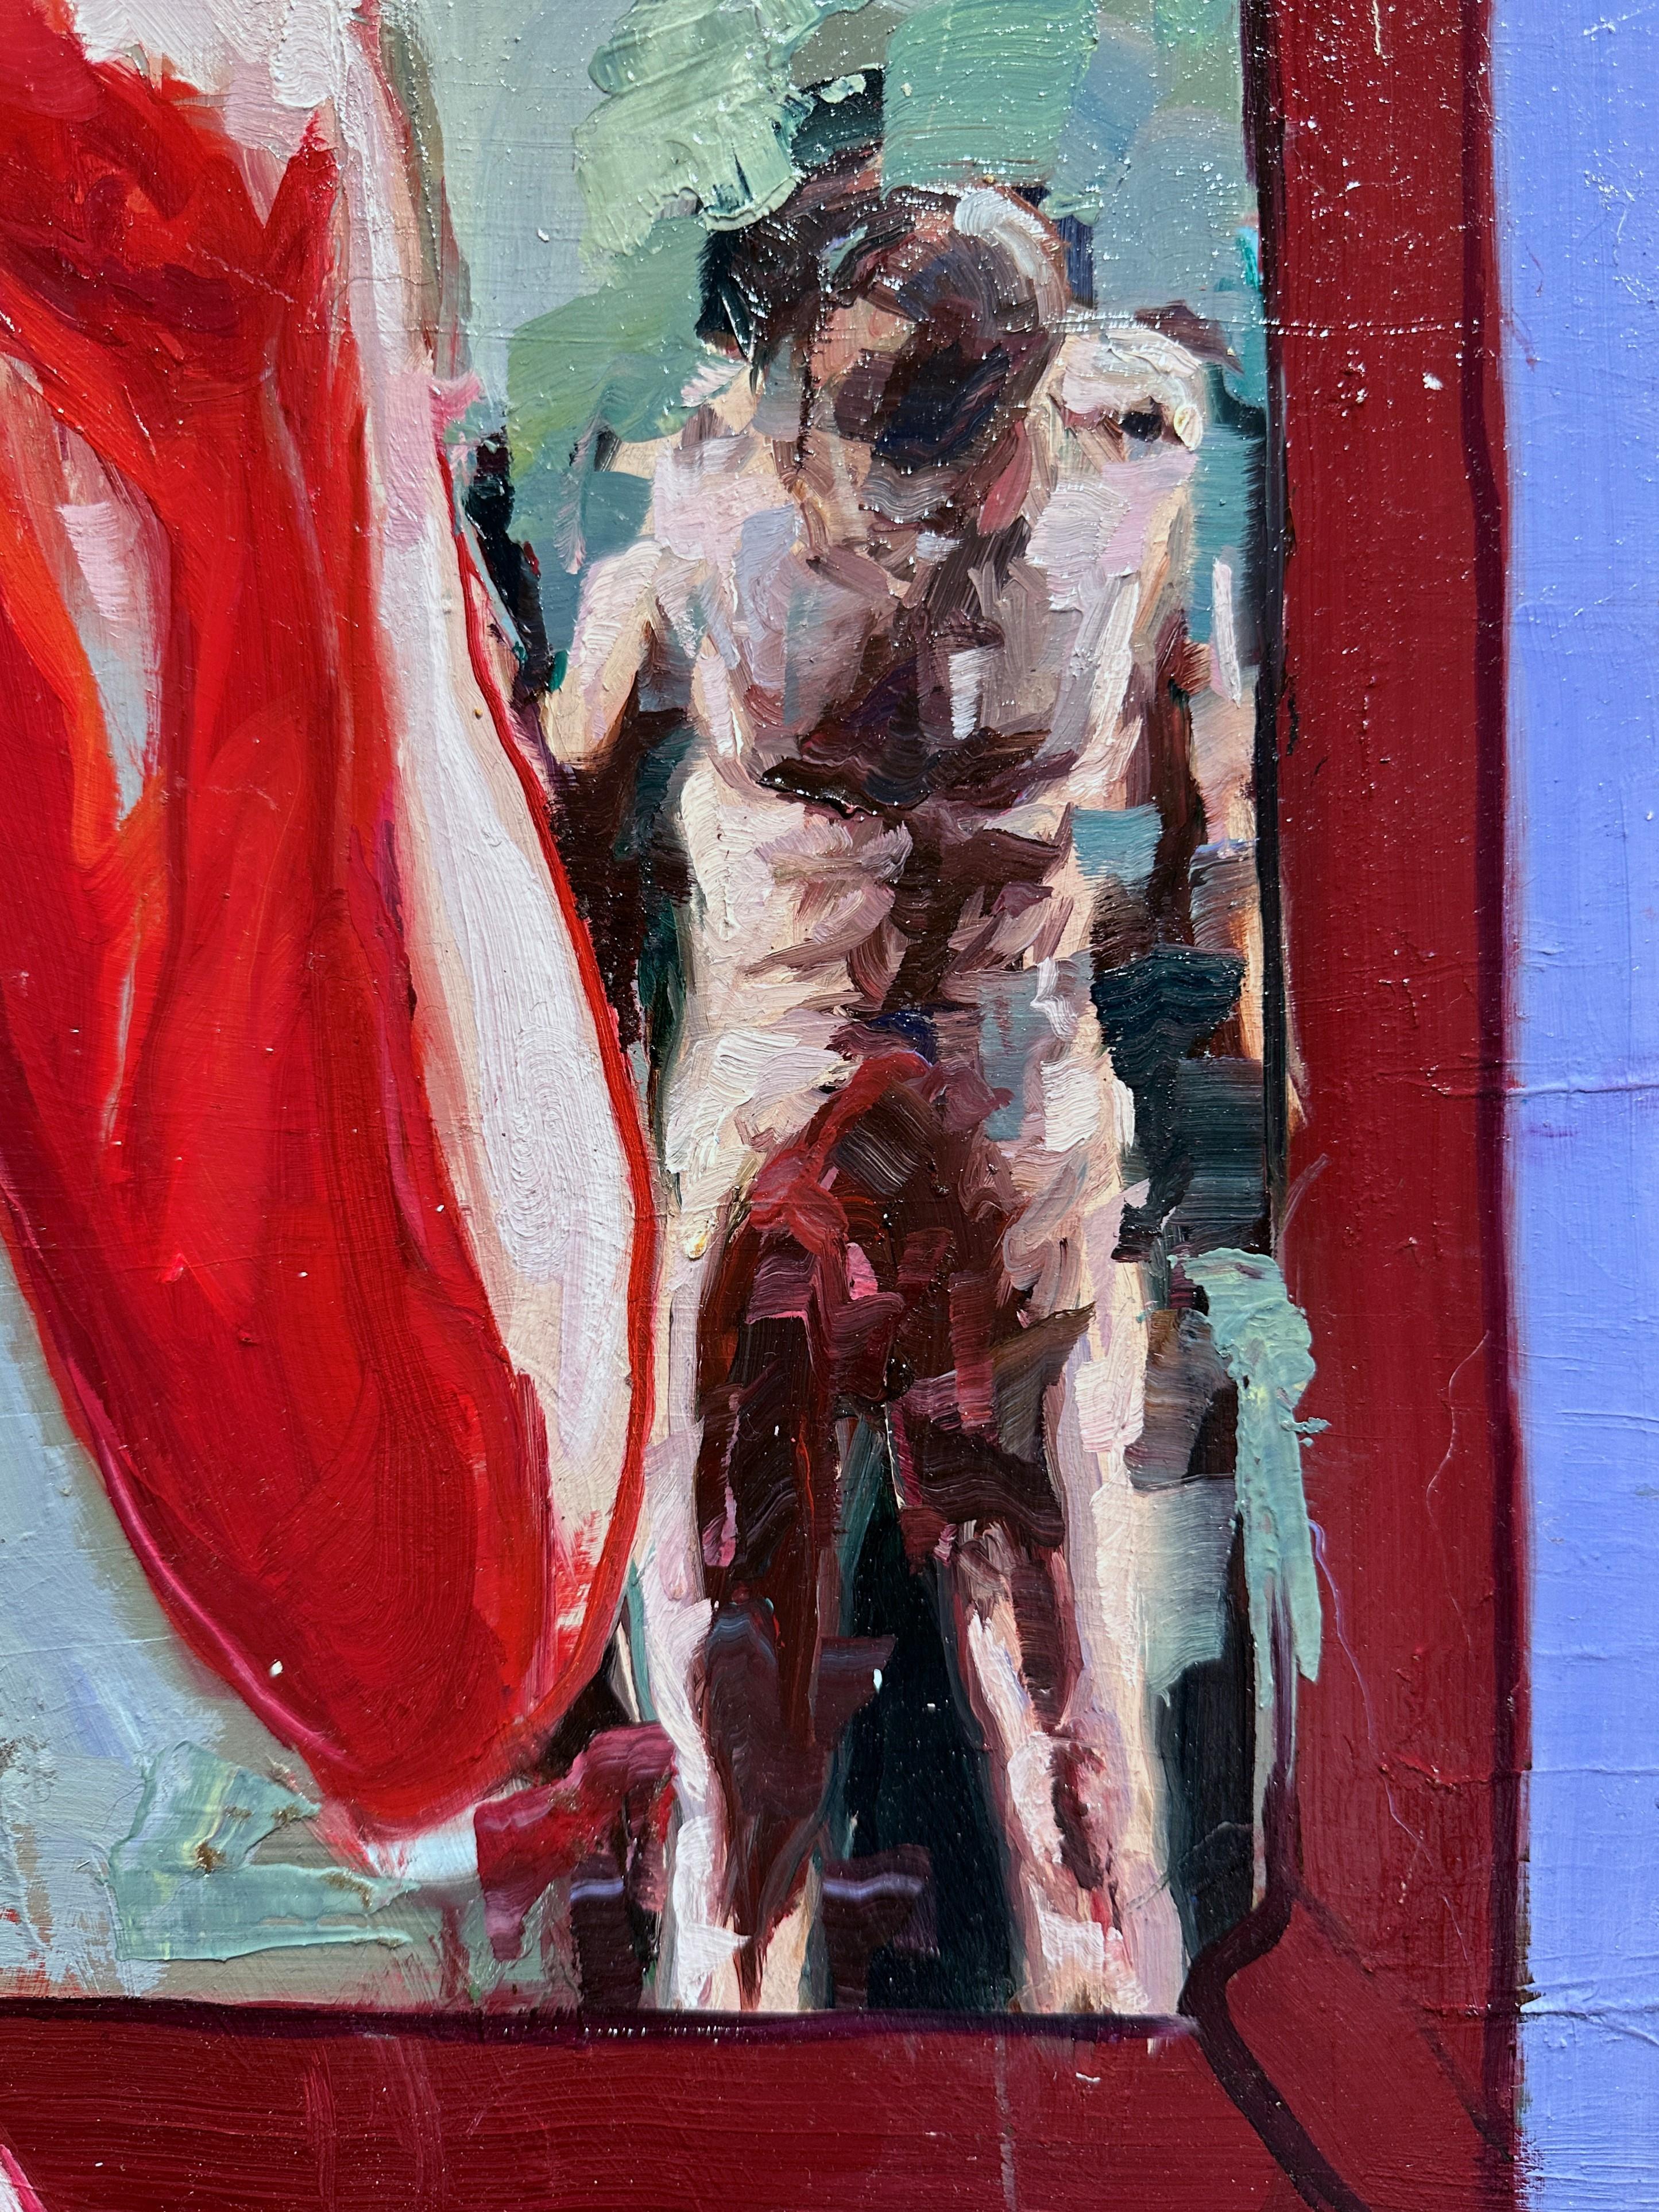 Bloody Birthday - Female Nude, Bold Colors and Heavy Textured Paint on Panel - Contemporary Painting by Georgia Hinaris